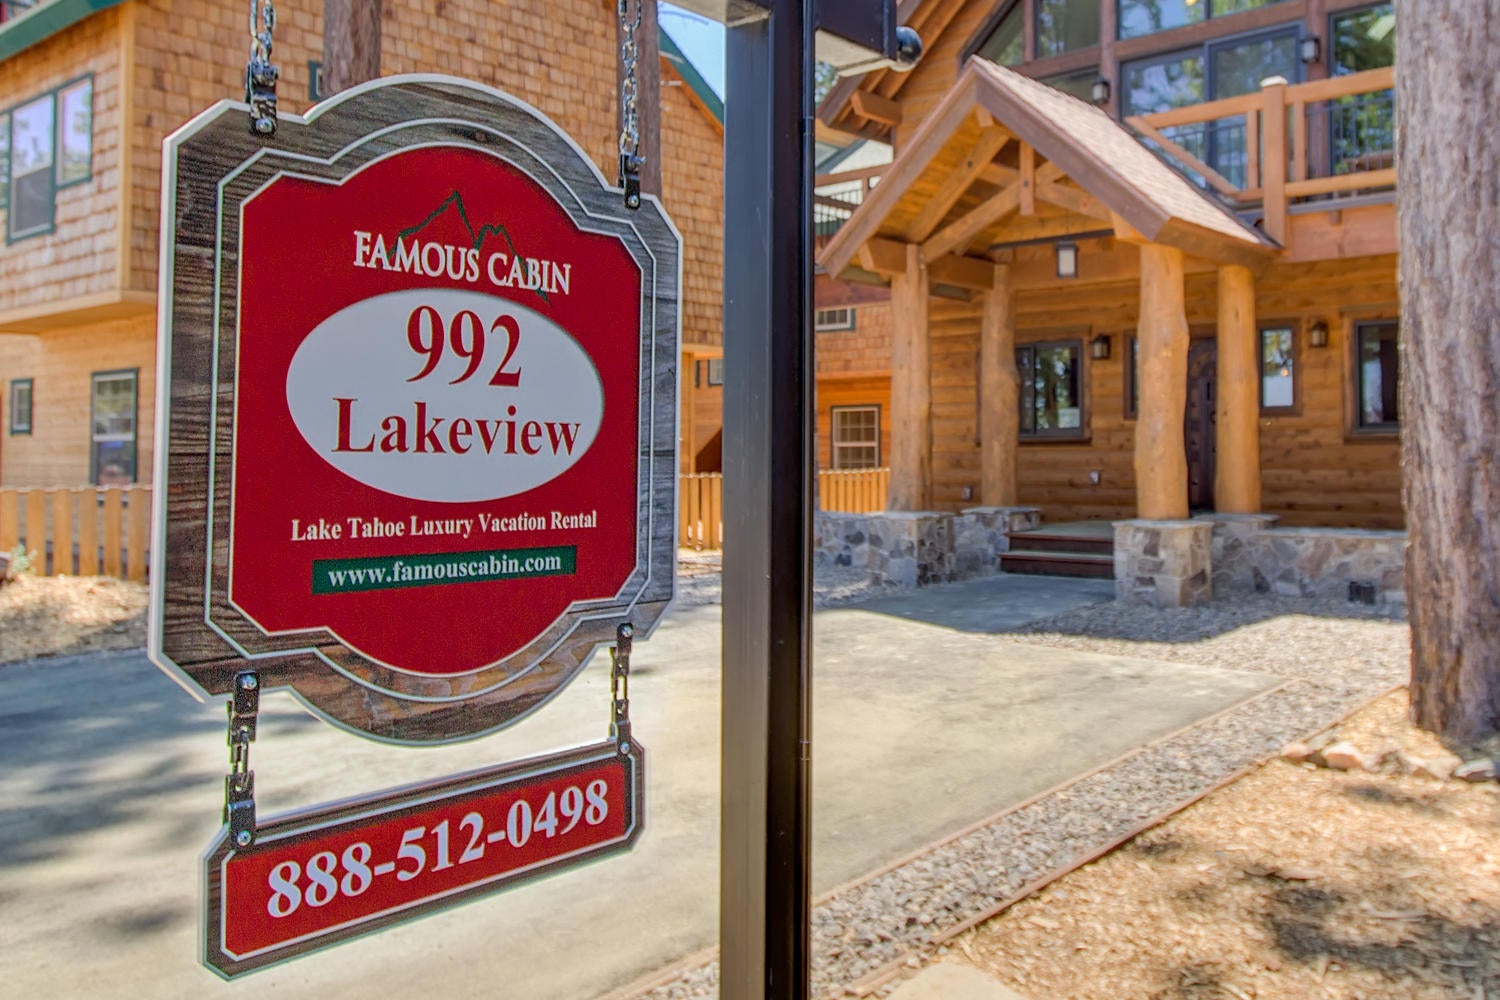 famous-cabin-lake-tahoe-luxury-vacation-rental-992-lakeview-ave-south-lake-tahoe-ca